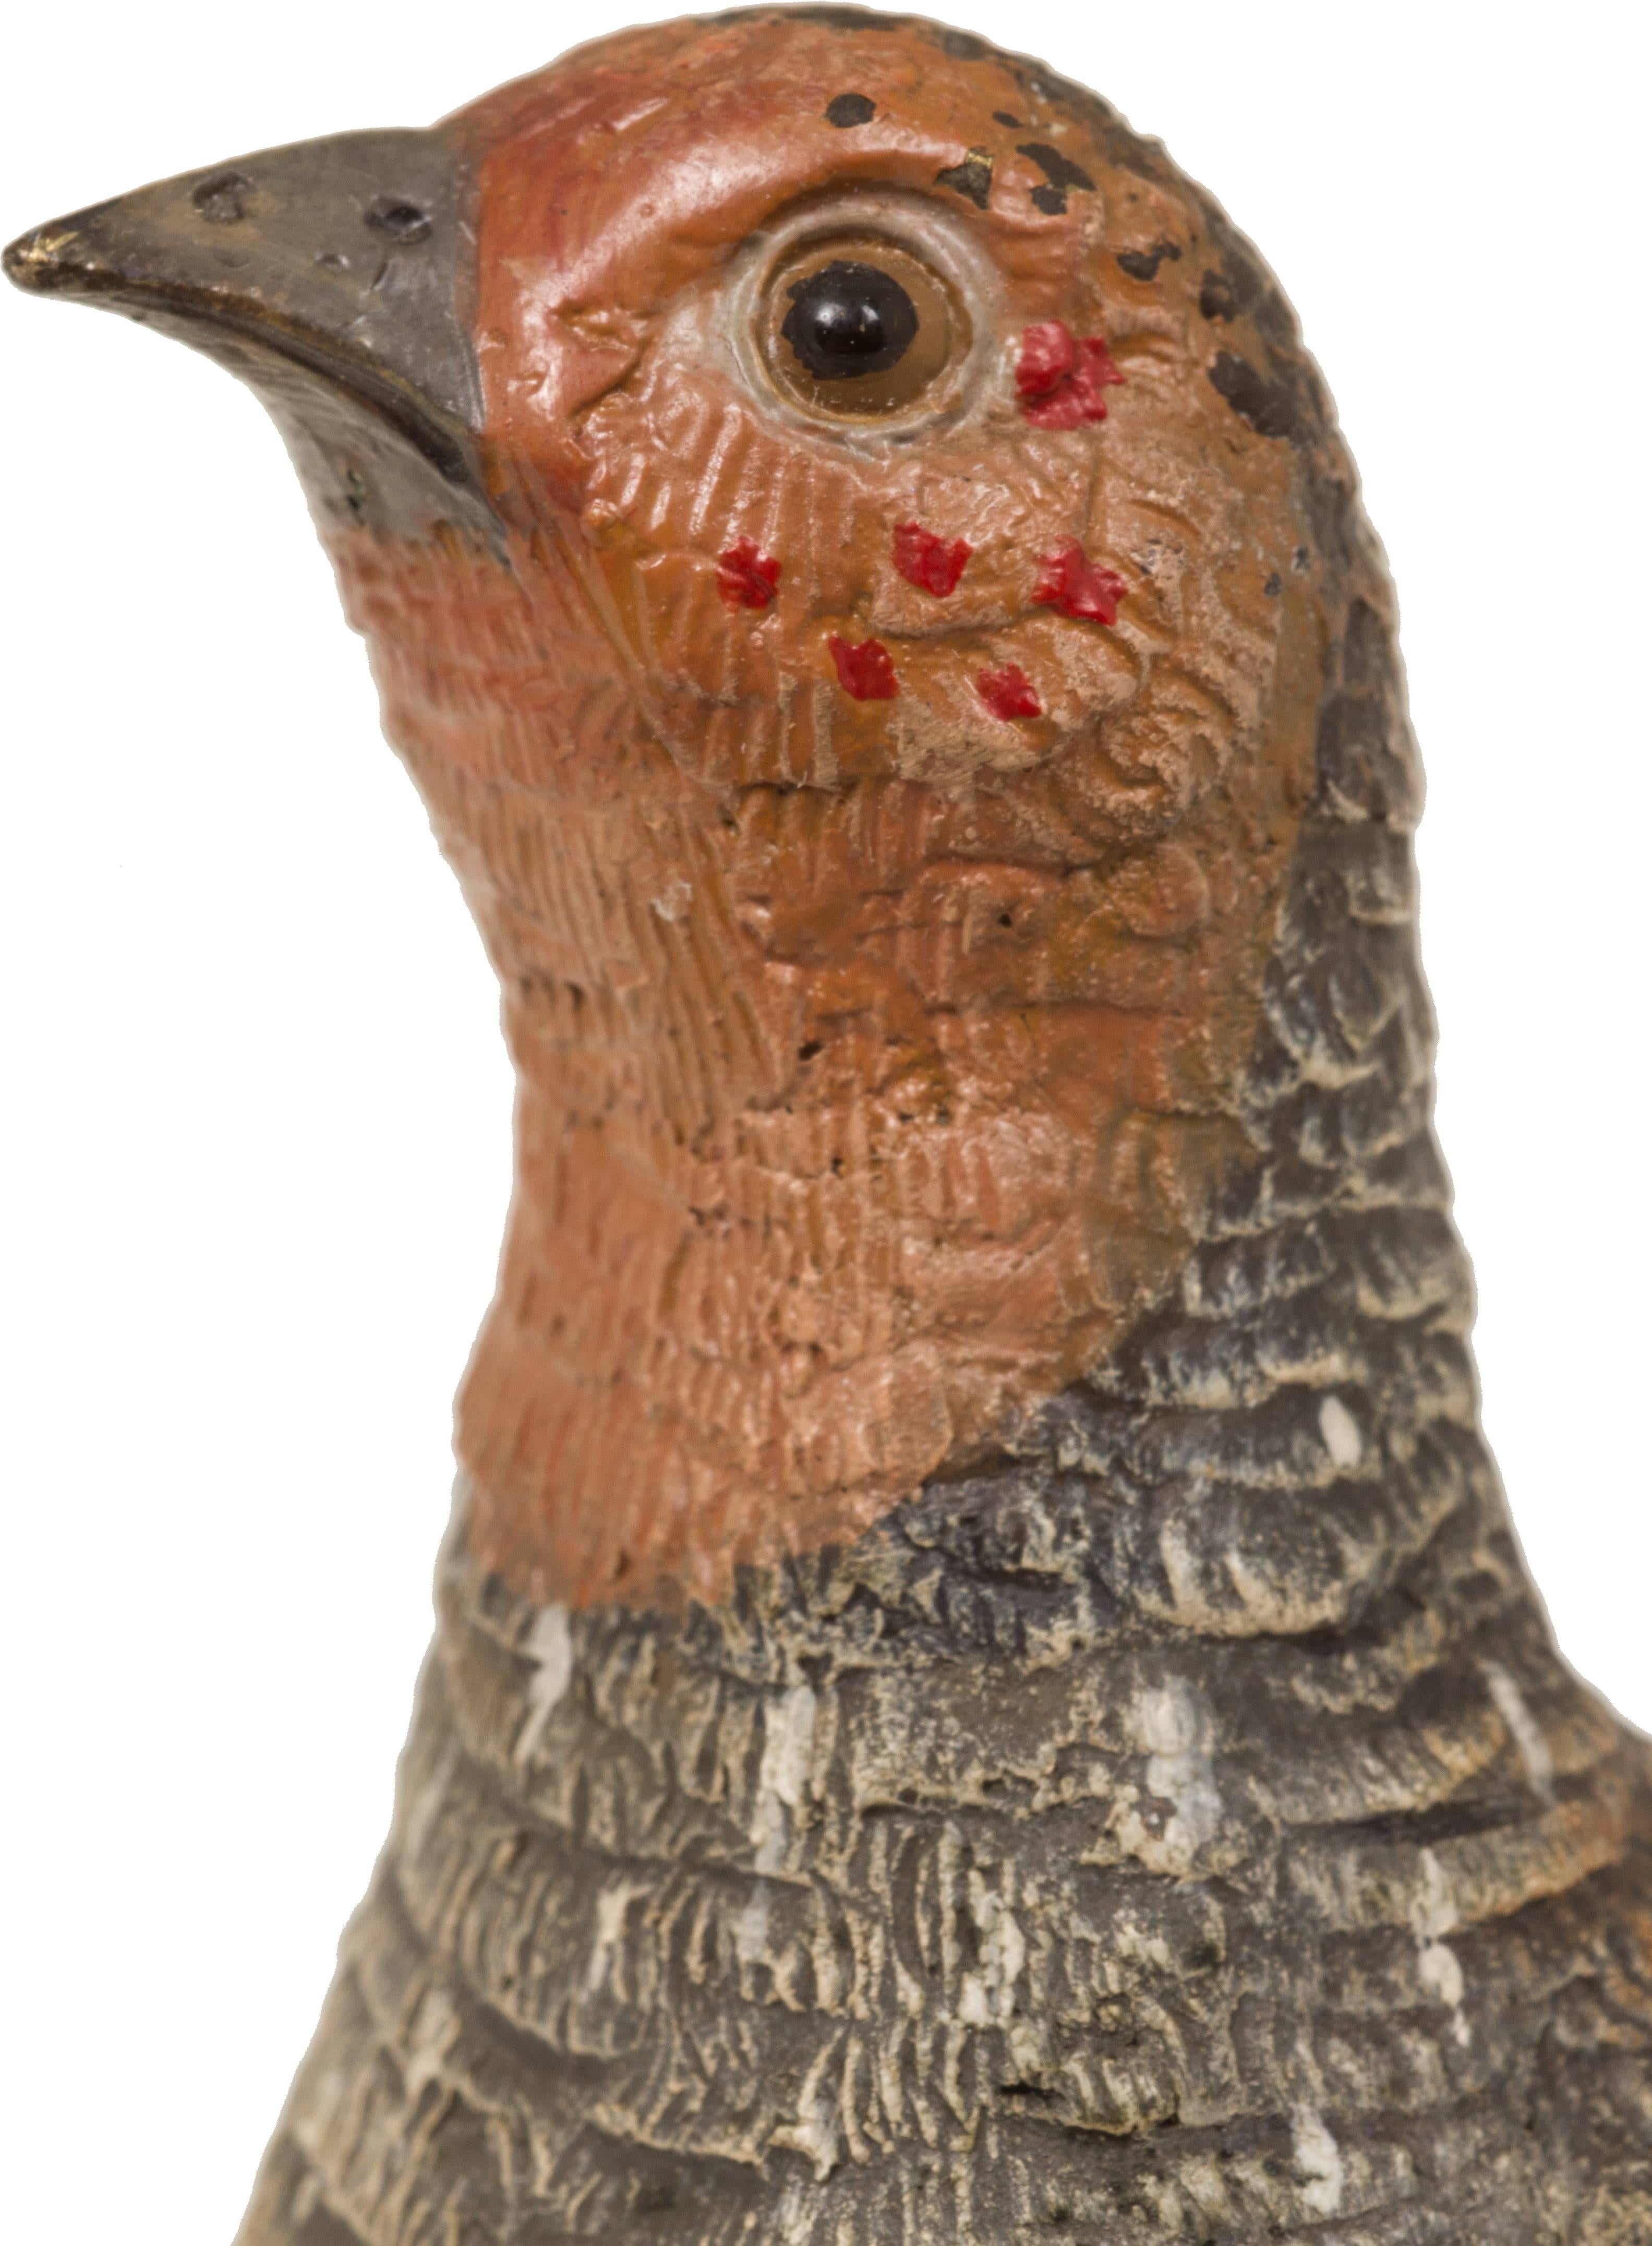 The detail on this piece is exceptional. The feathers are beautifully detailed and the bird has glass eyes.